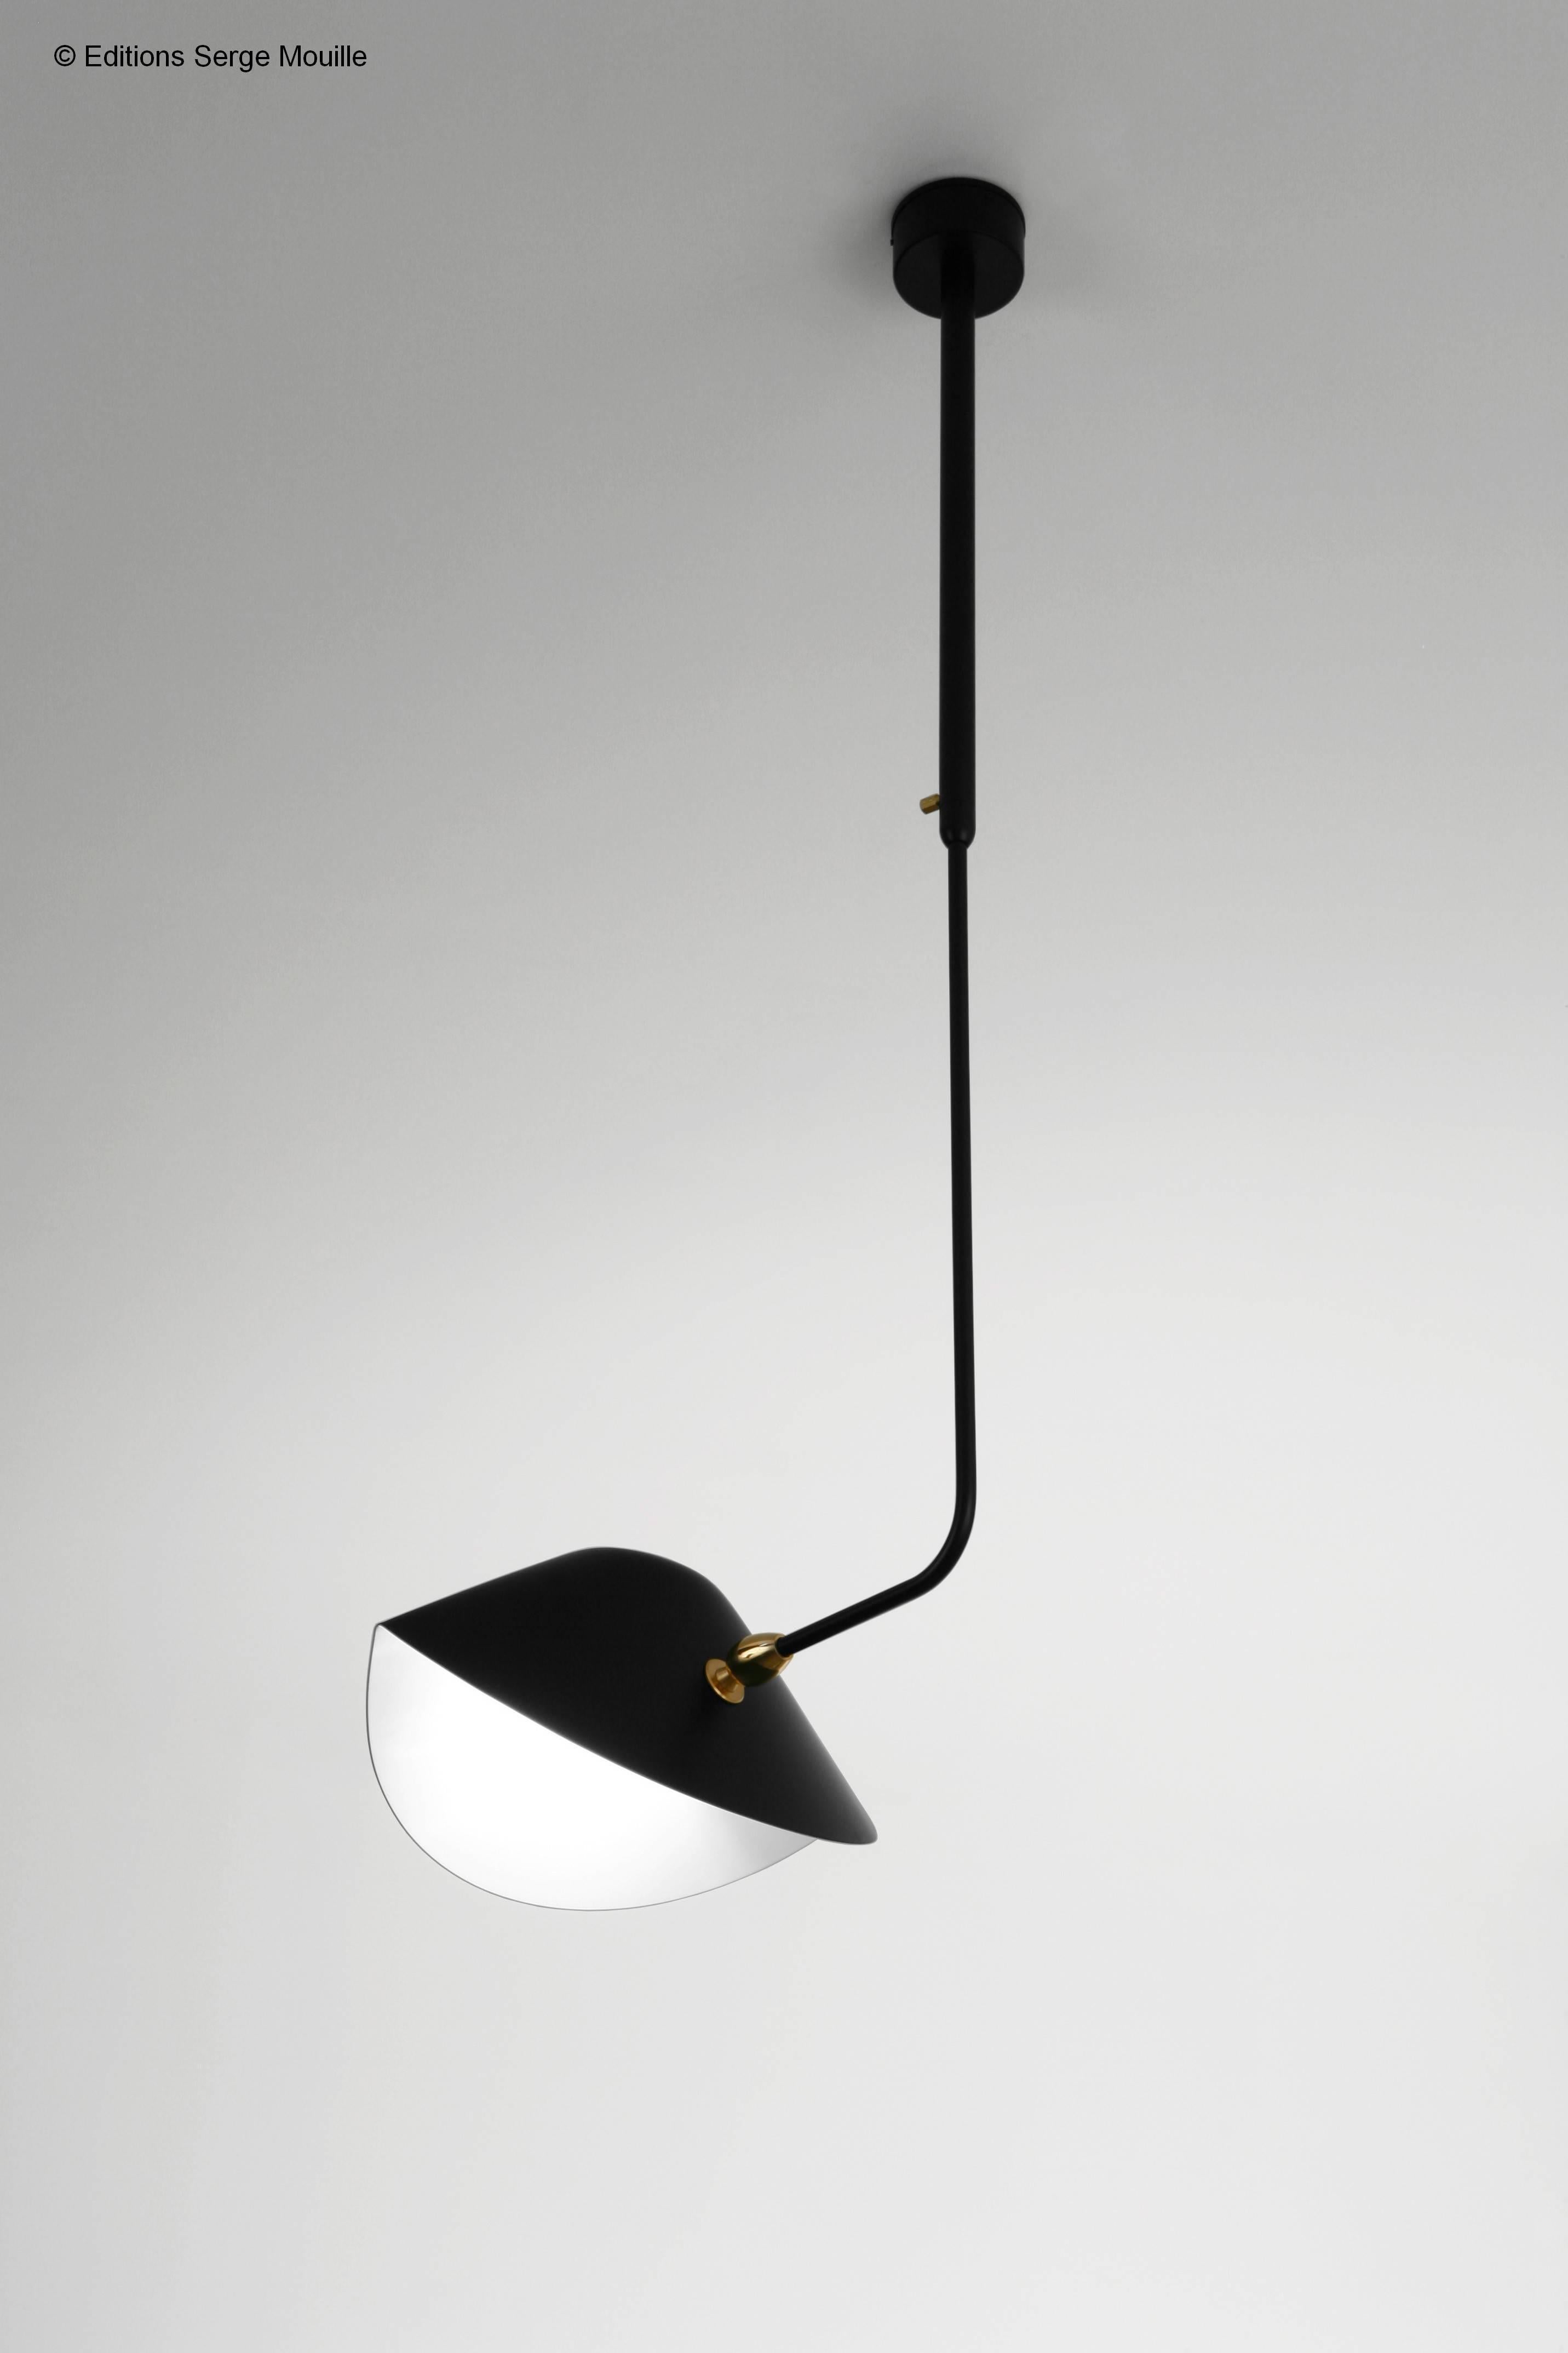 Serge Mouille 'Bibliothèque Courbe' ceiling lamp in black.

Originally designed in 1953, this iconic pendant lamp is still made by Edition Serge Mouille in France using many of the same small-scale manufacturing techniques and scrupulous attention